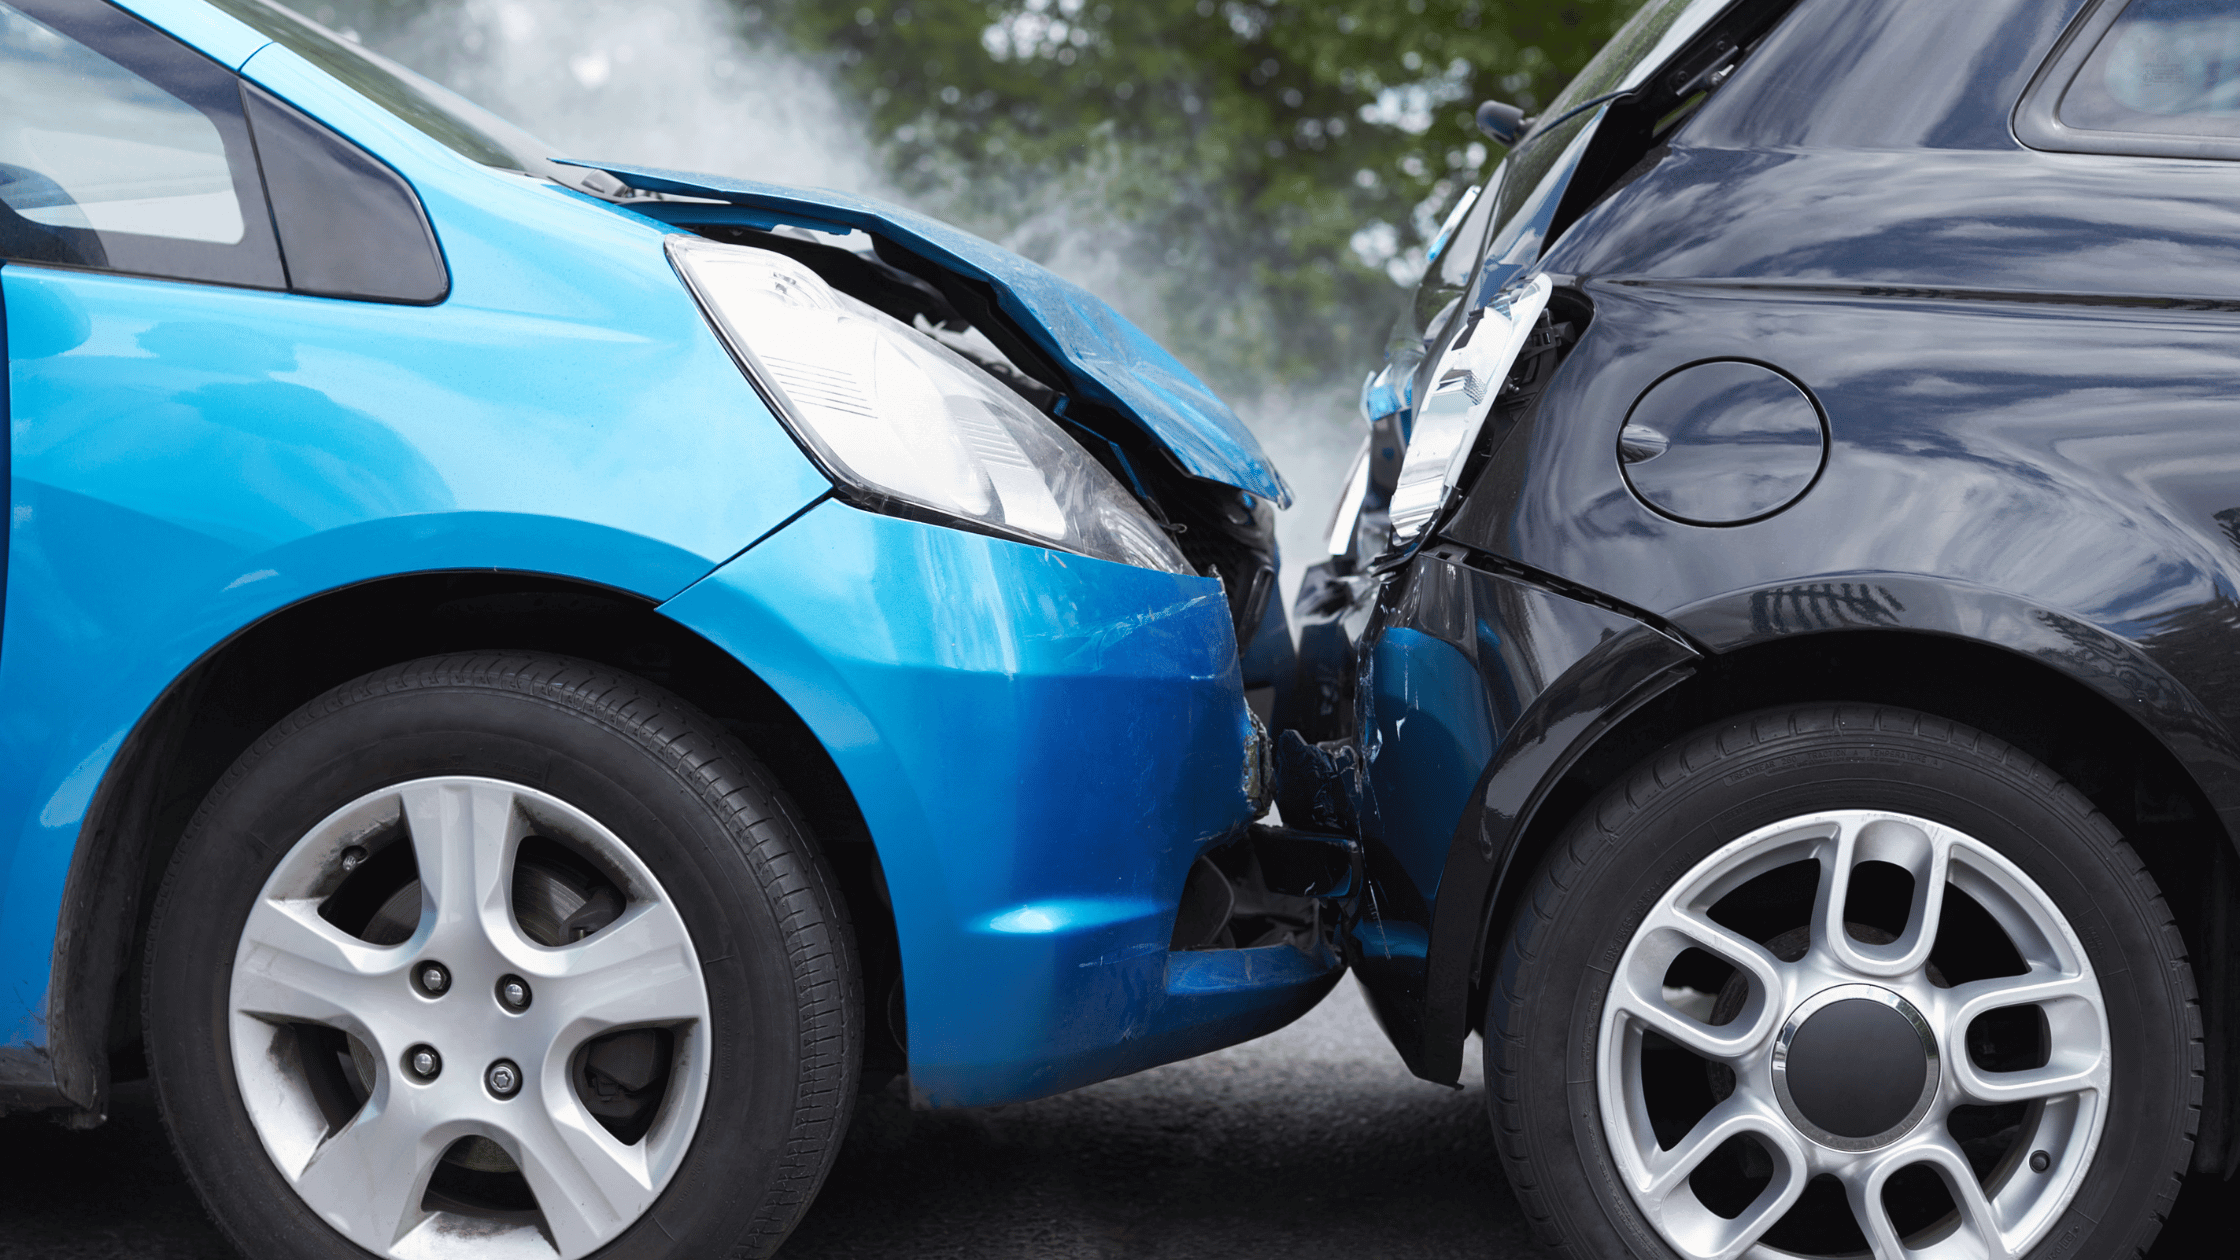 The Road to Recovery: How Physical Therapy Helps After a Car Accident